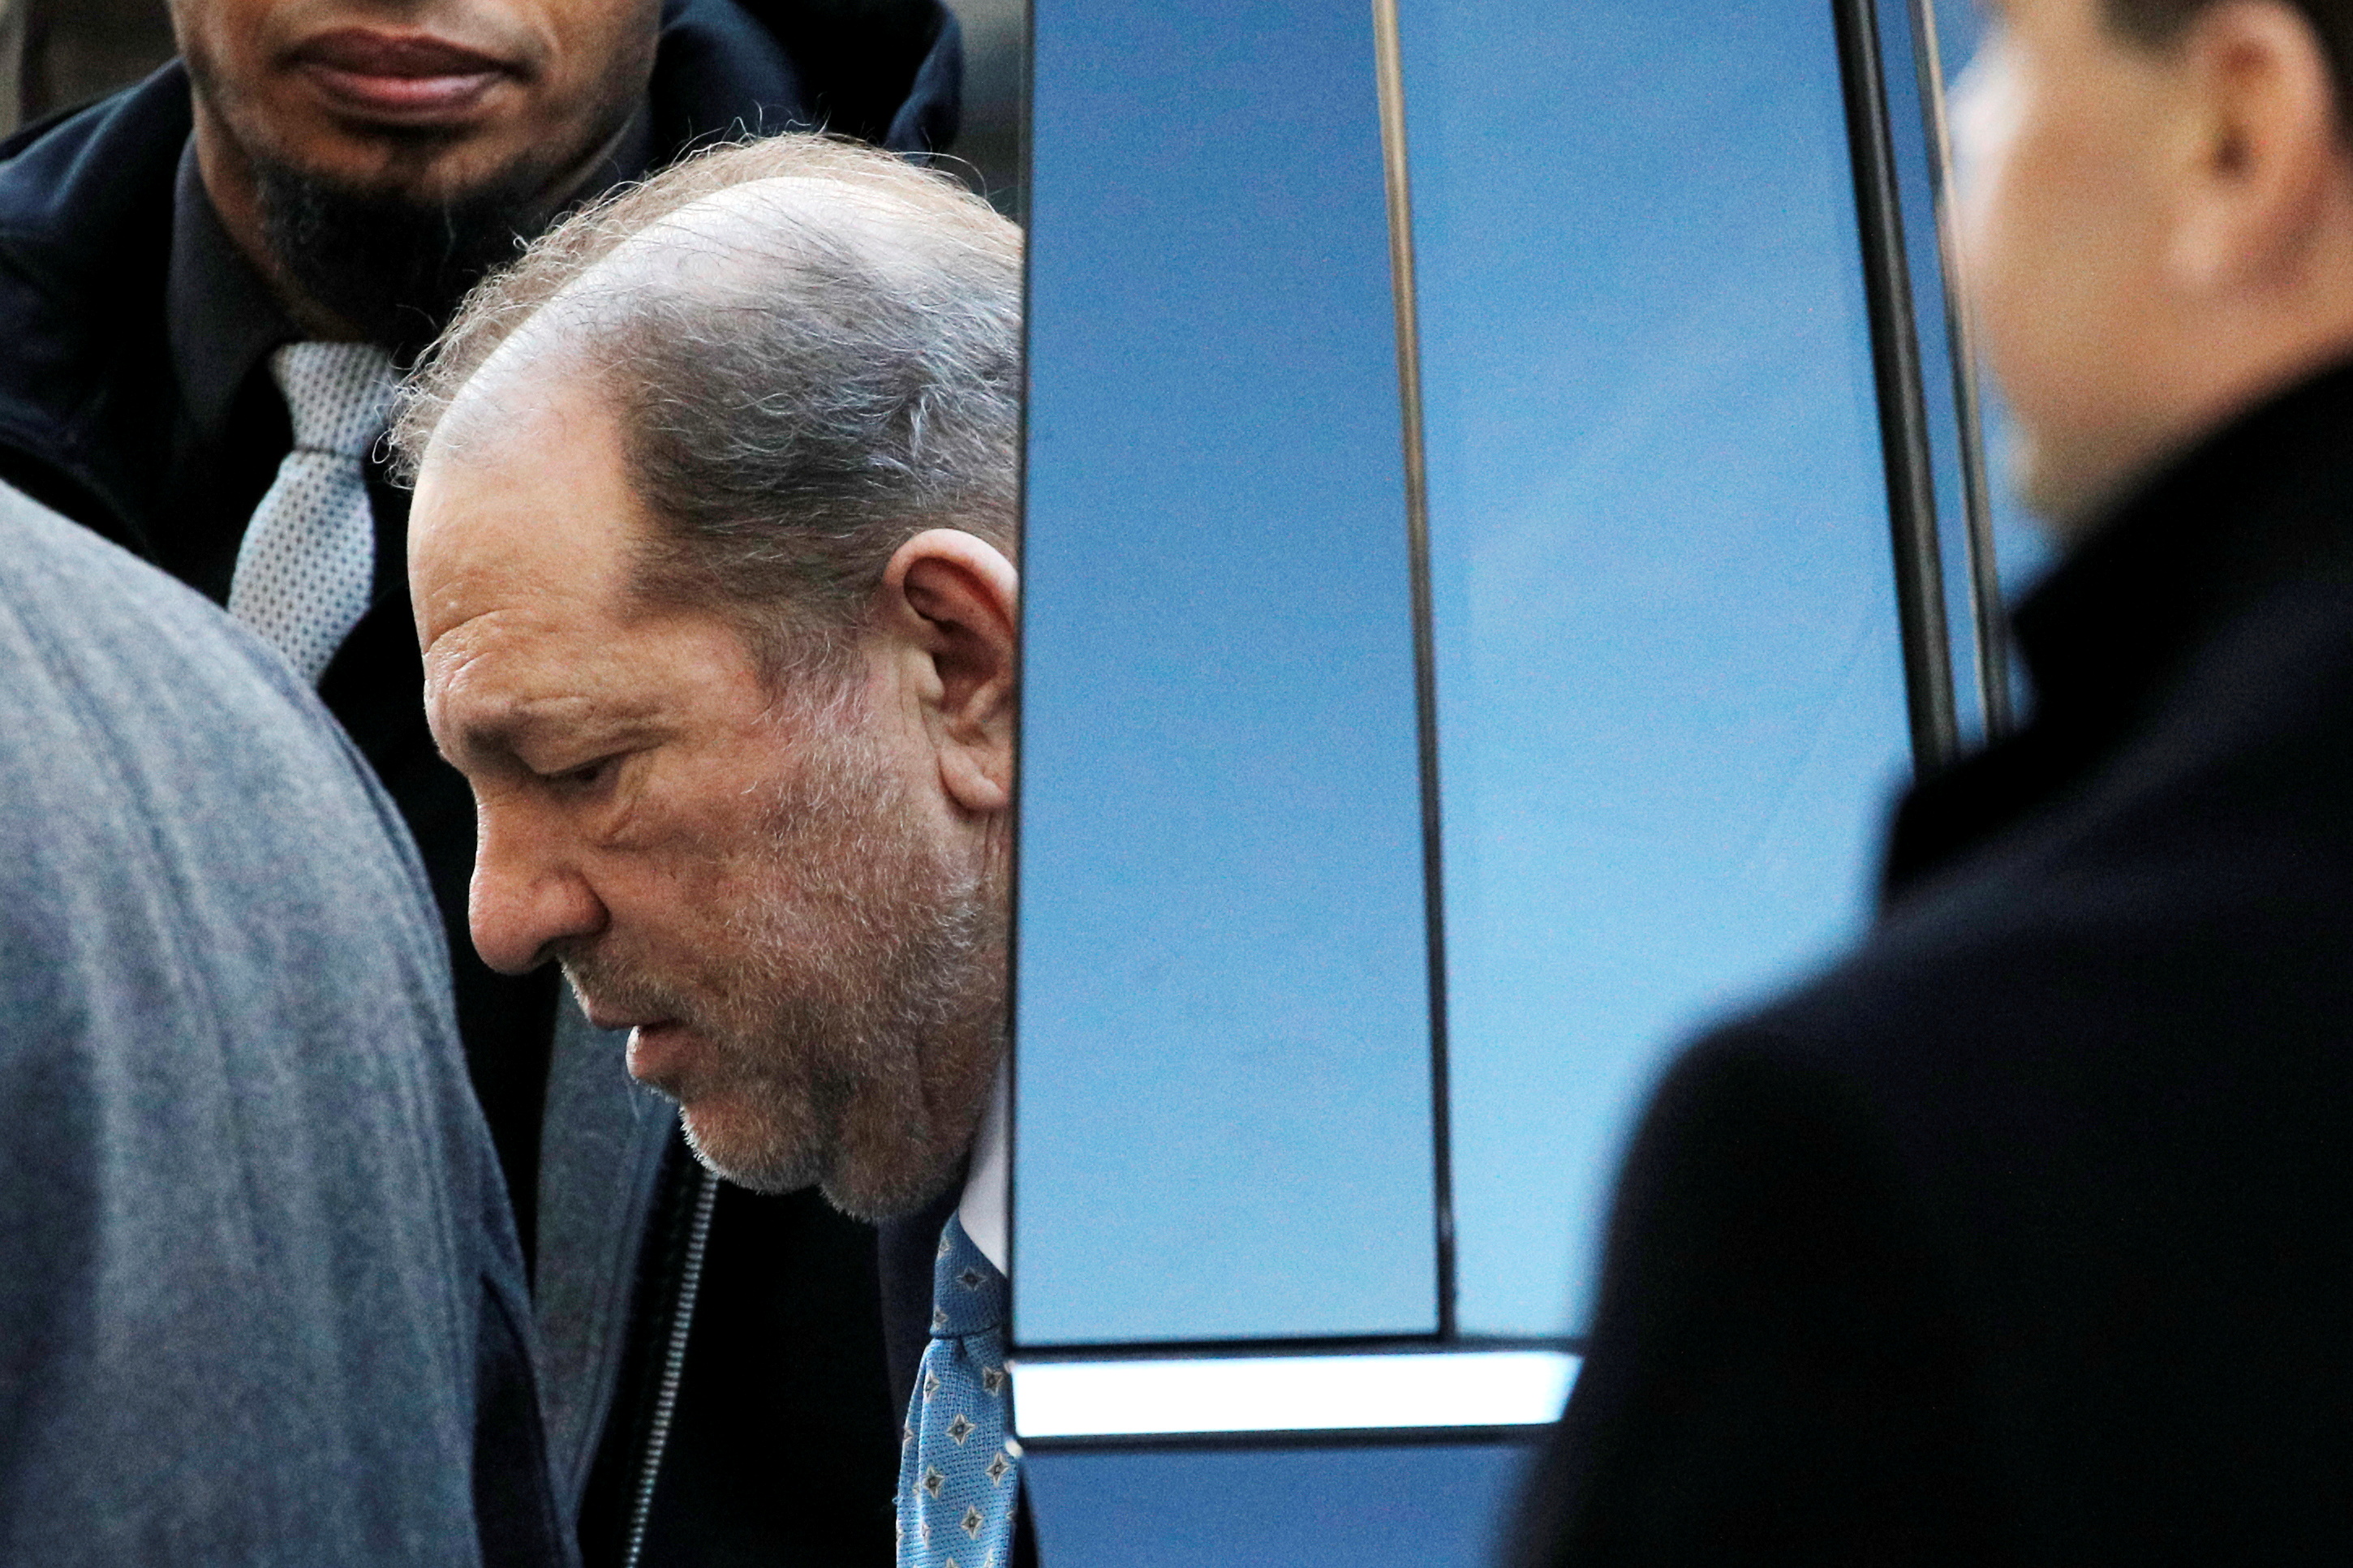 Film producer Harvey Weinstein arrives at New York Criminal Court ahead of the fifth day of jury deliberations for his sexual assault trial in the Manhattan borough of New York City, New York